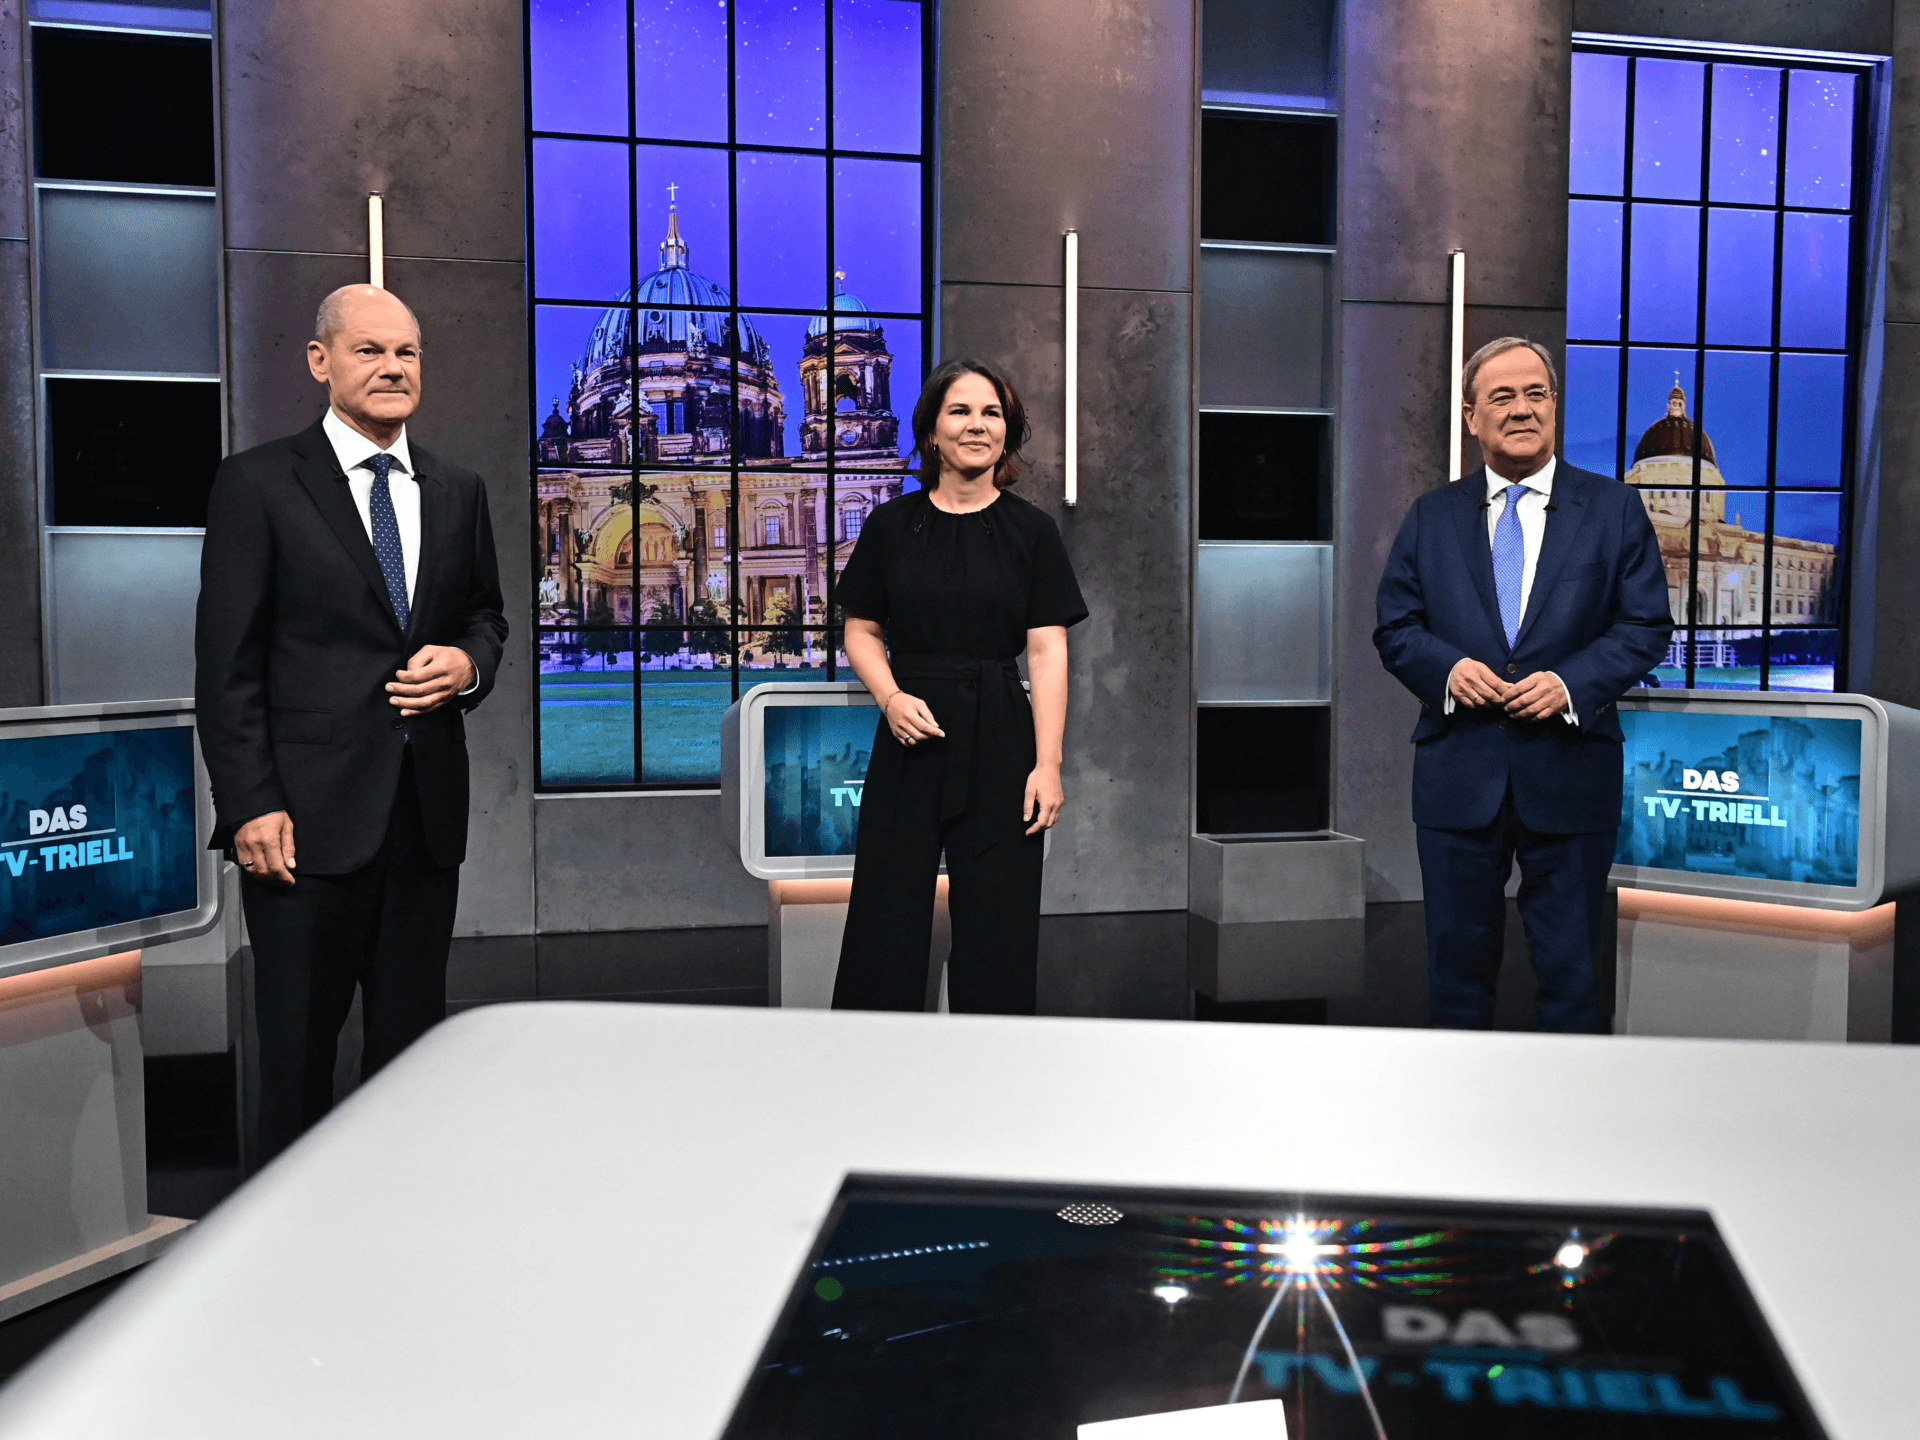 Top candidates for the upcoming German general elections (L-R) Olaf Scholz of the Social Democrats SPD, Annalena Baerbock of Germany's Greens (Die Gruenen) and Armin Laschet of the conservative CDU/CSU party union pose for pictures before a "Triell" television debate on September 19, 2021 in Berlin, ahead of Germany's general elections scheduled for September 26. (Photo by Tobias Schwarz / AFP) (Photo by TOBIAS SCHWARZ/AFP via Getty Images)